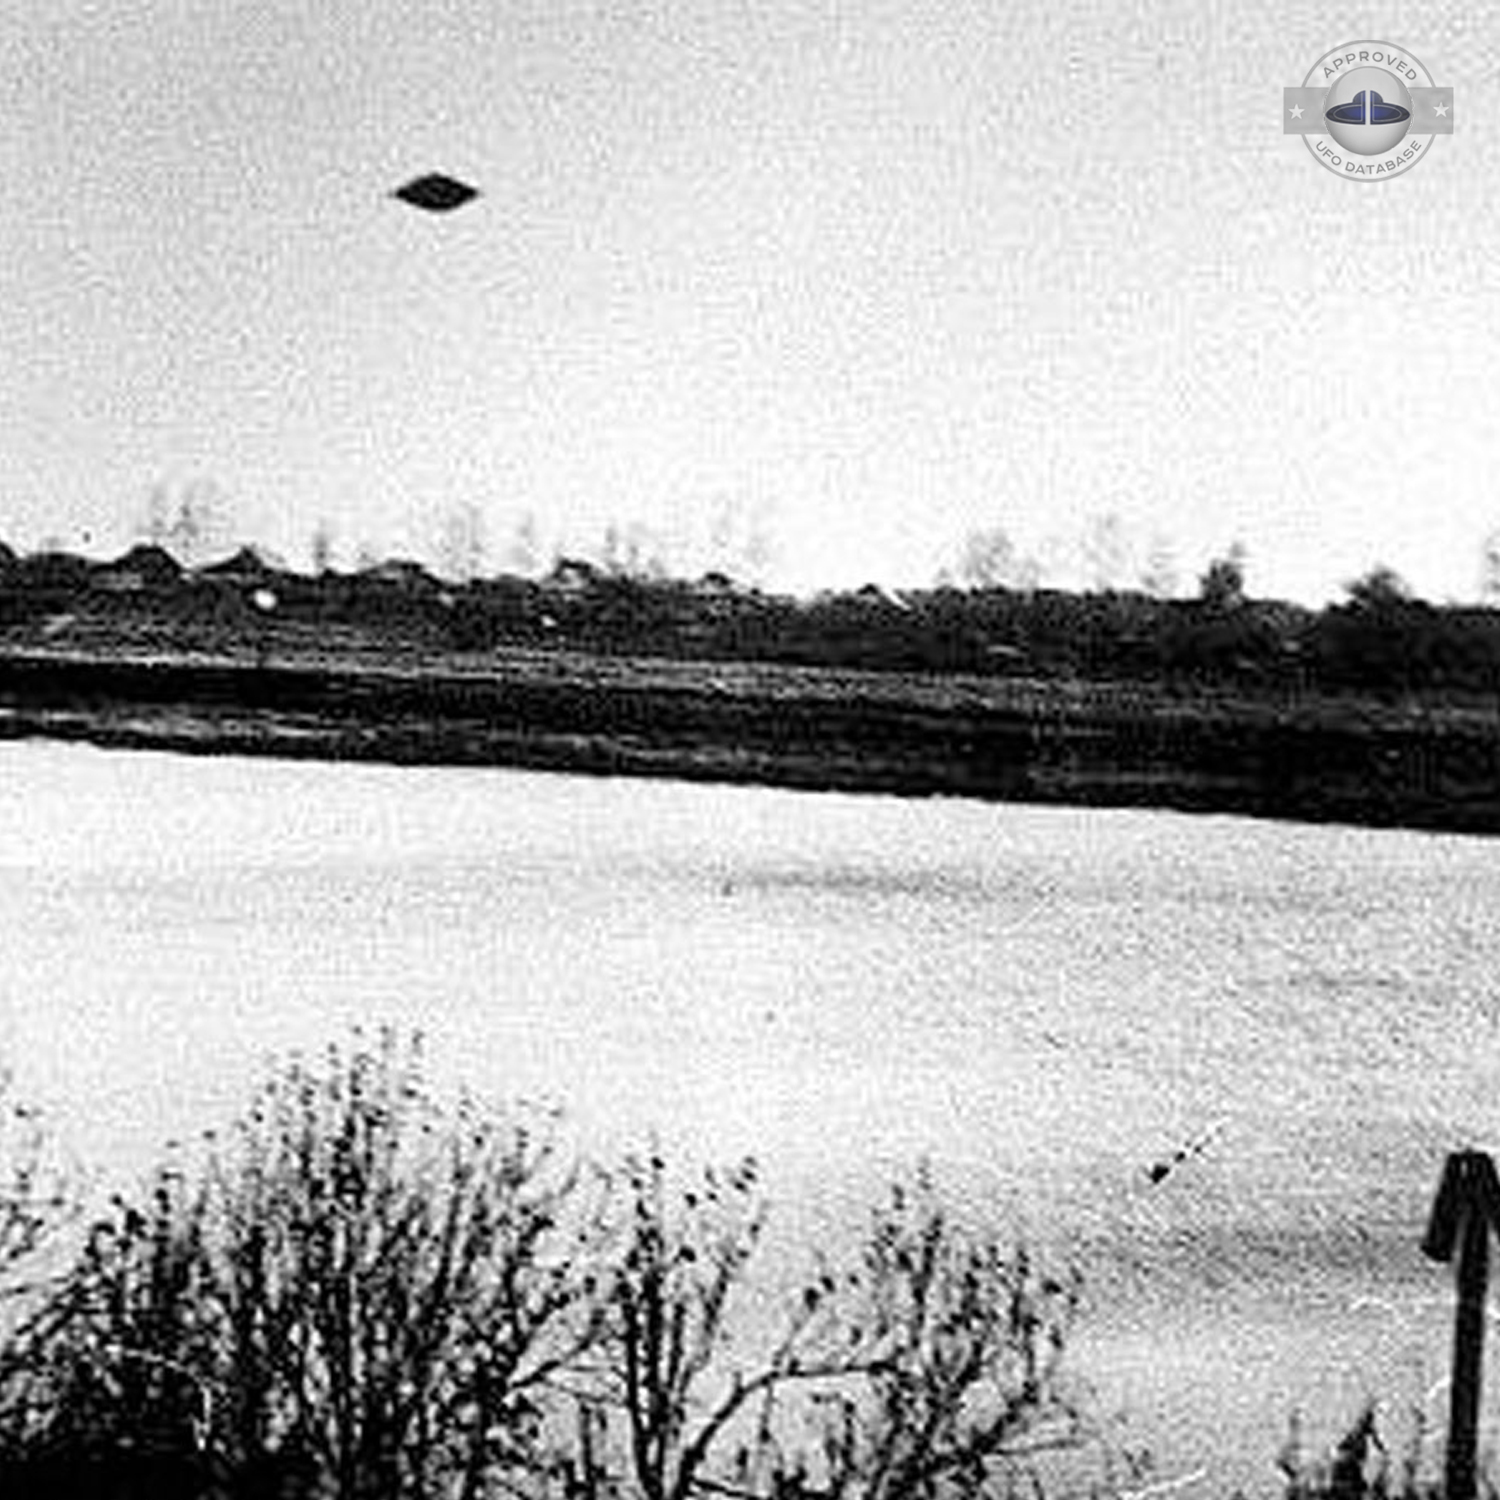 Sighting of UFO by two teenagers in Russia - Volga river Tver | 1991 UFO Picture #215-2